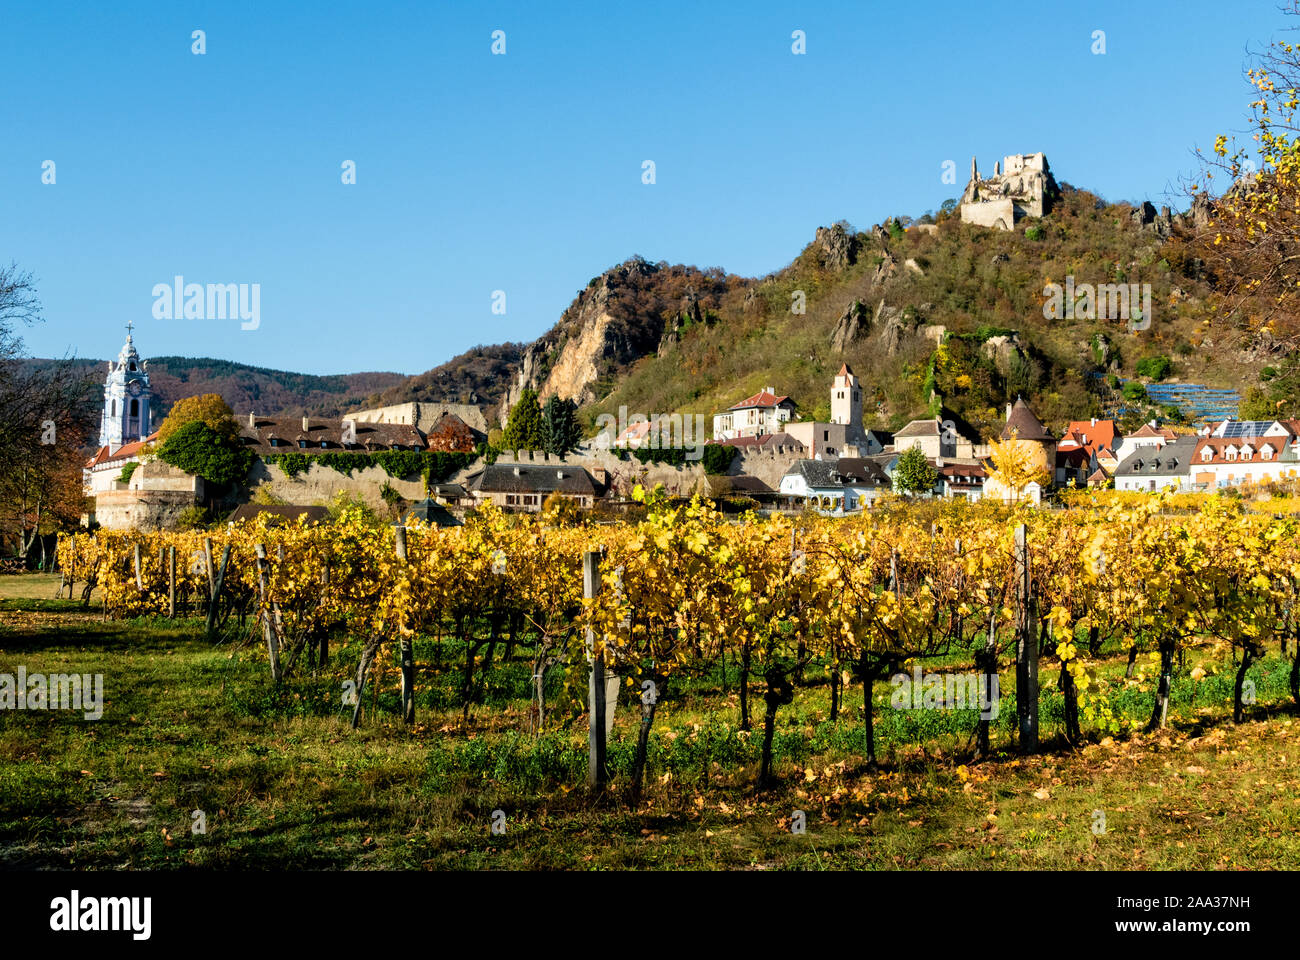 Durnstein town with the vineyard in the foreground and Durnstein castle on top of the hill Stock Photo